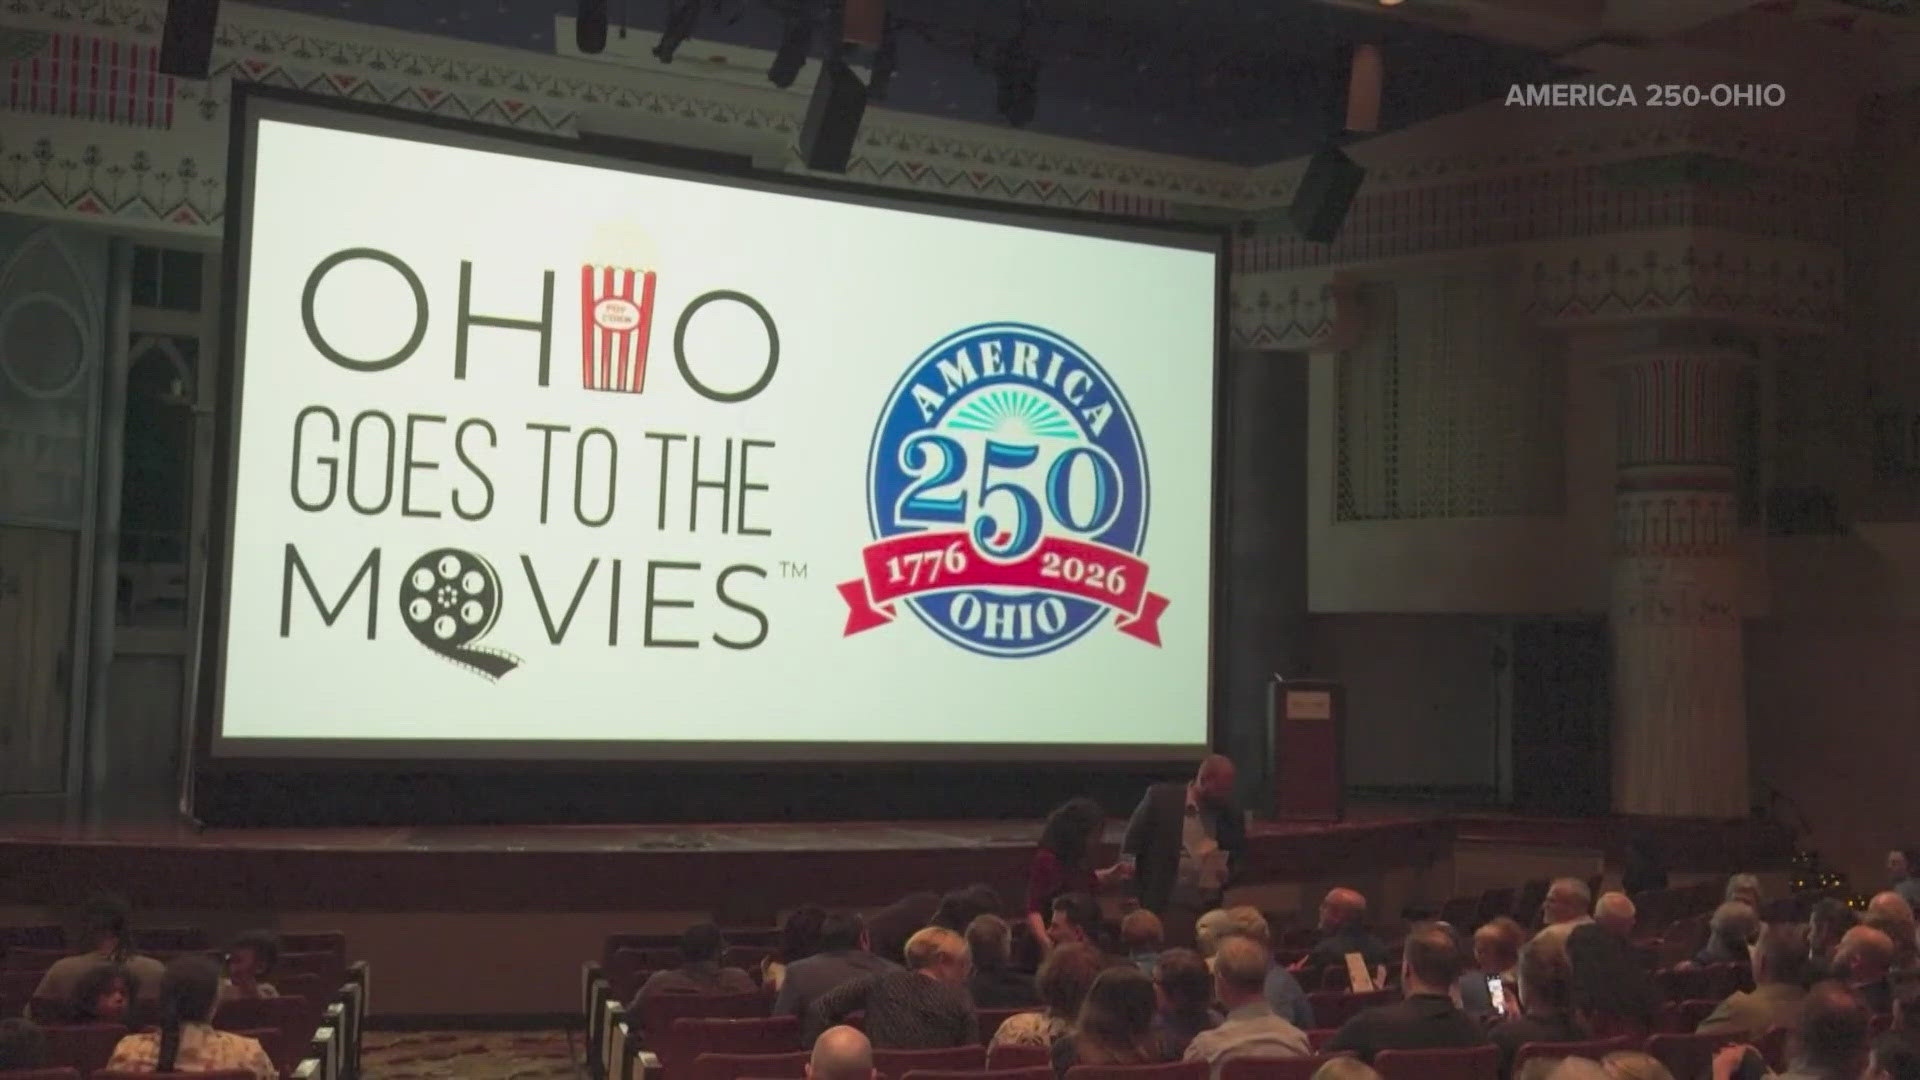 Part of the United States' 250th Anniversary celebration, "Ohio Goes to the Movies" is a project that will culminate in a 100-day film festival in 2026.